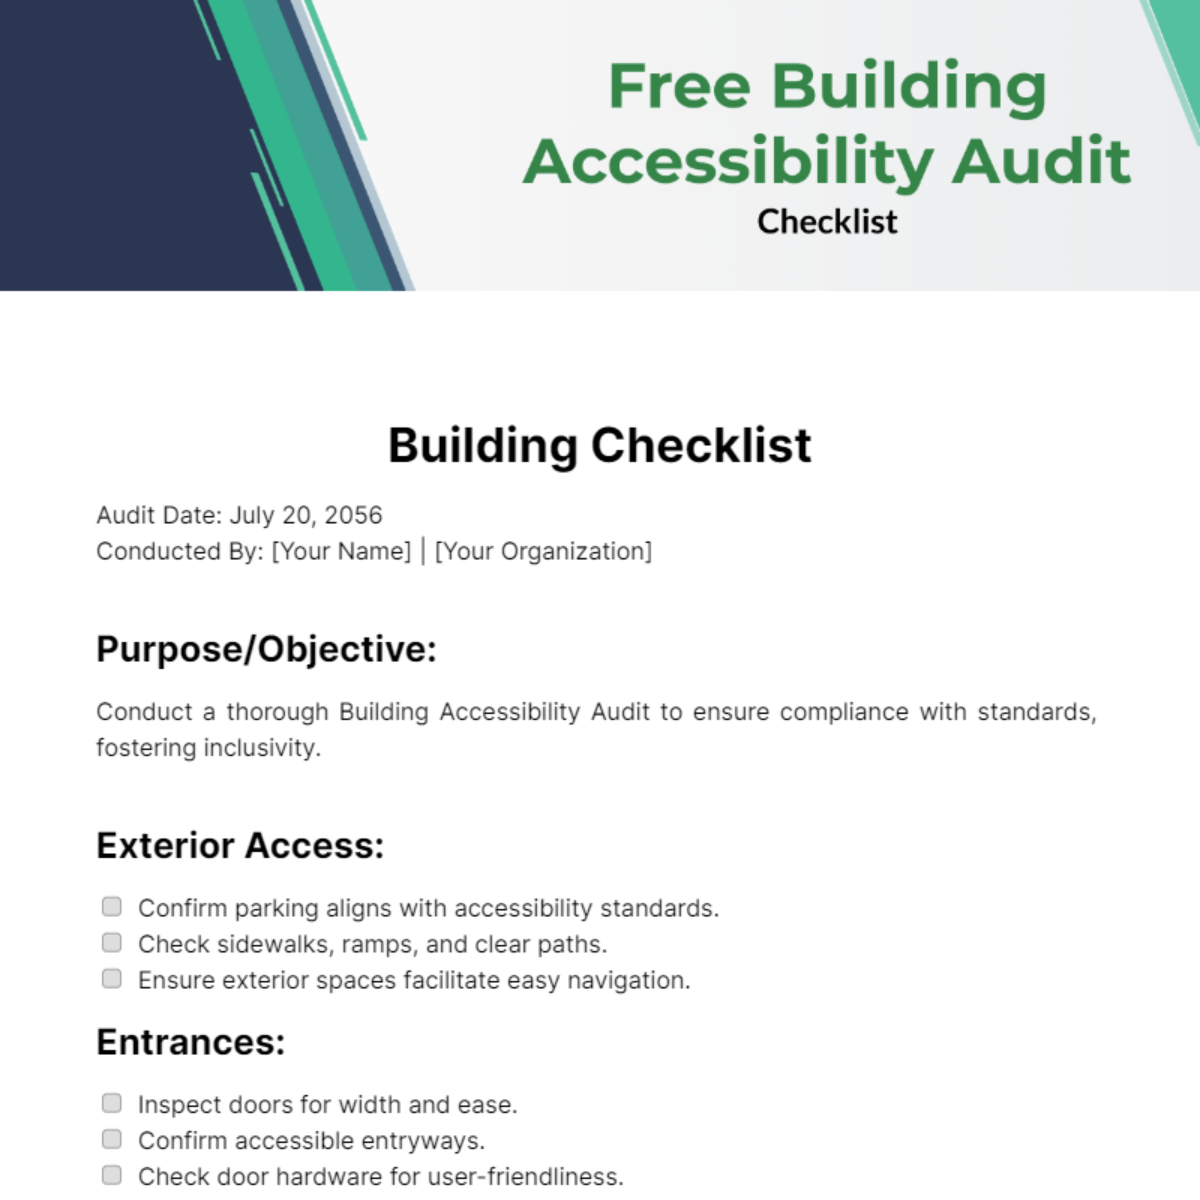 Free Building Accessibility Audit Checklist Template